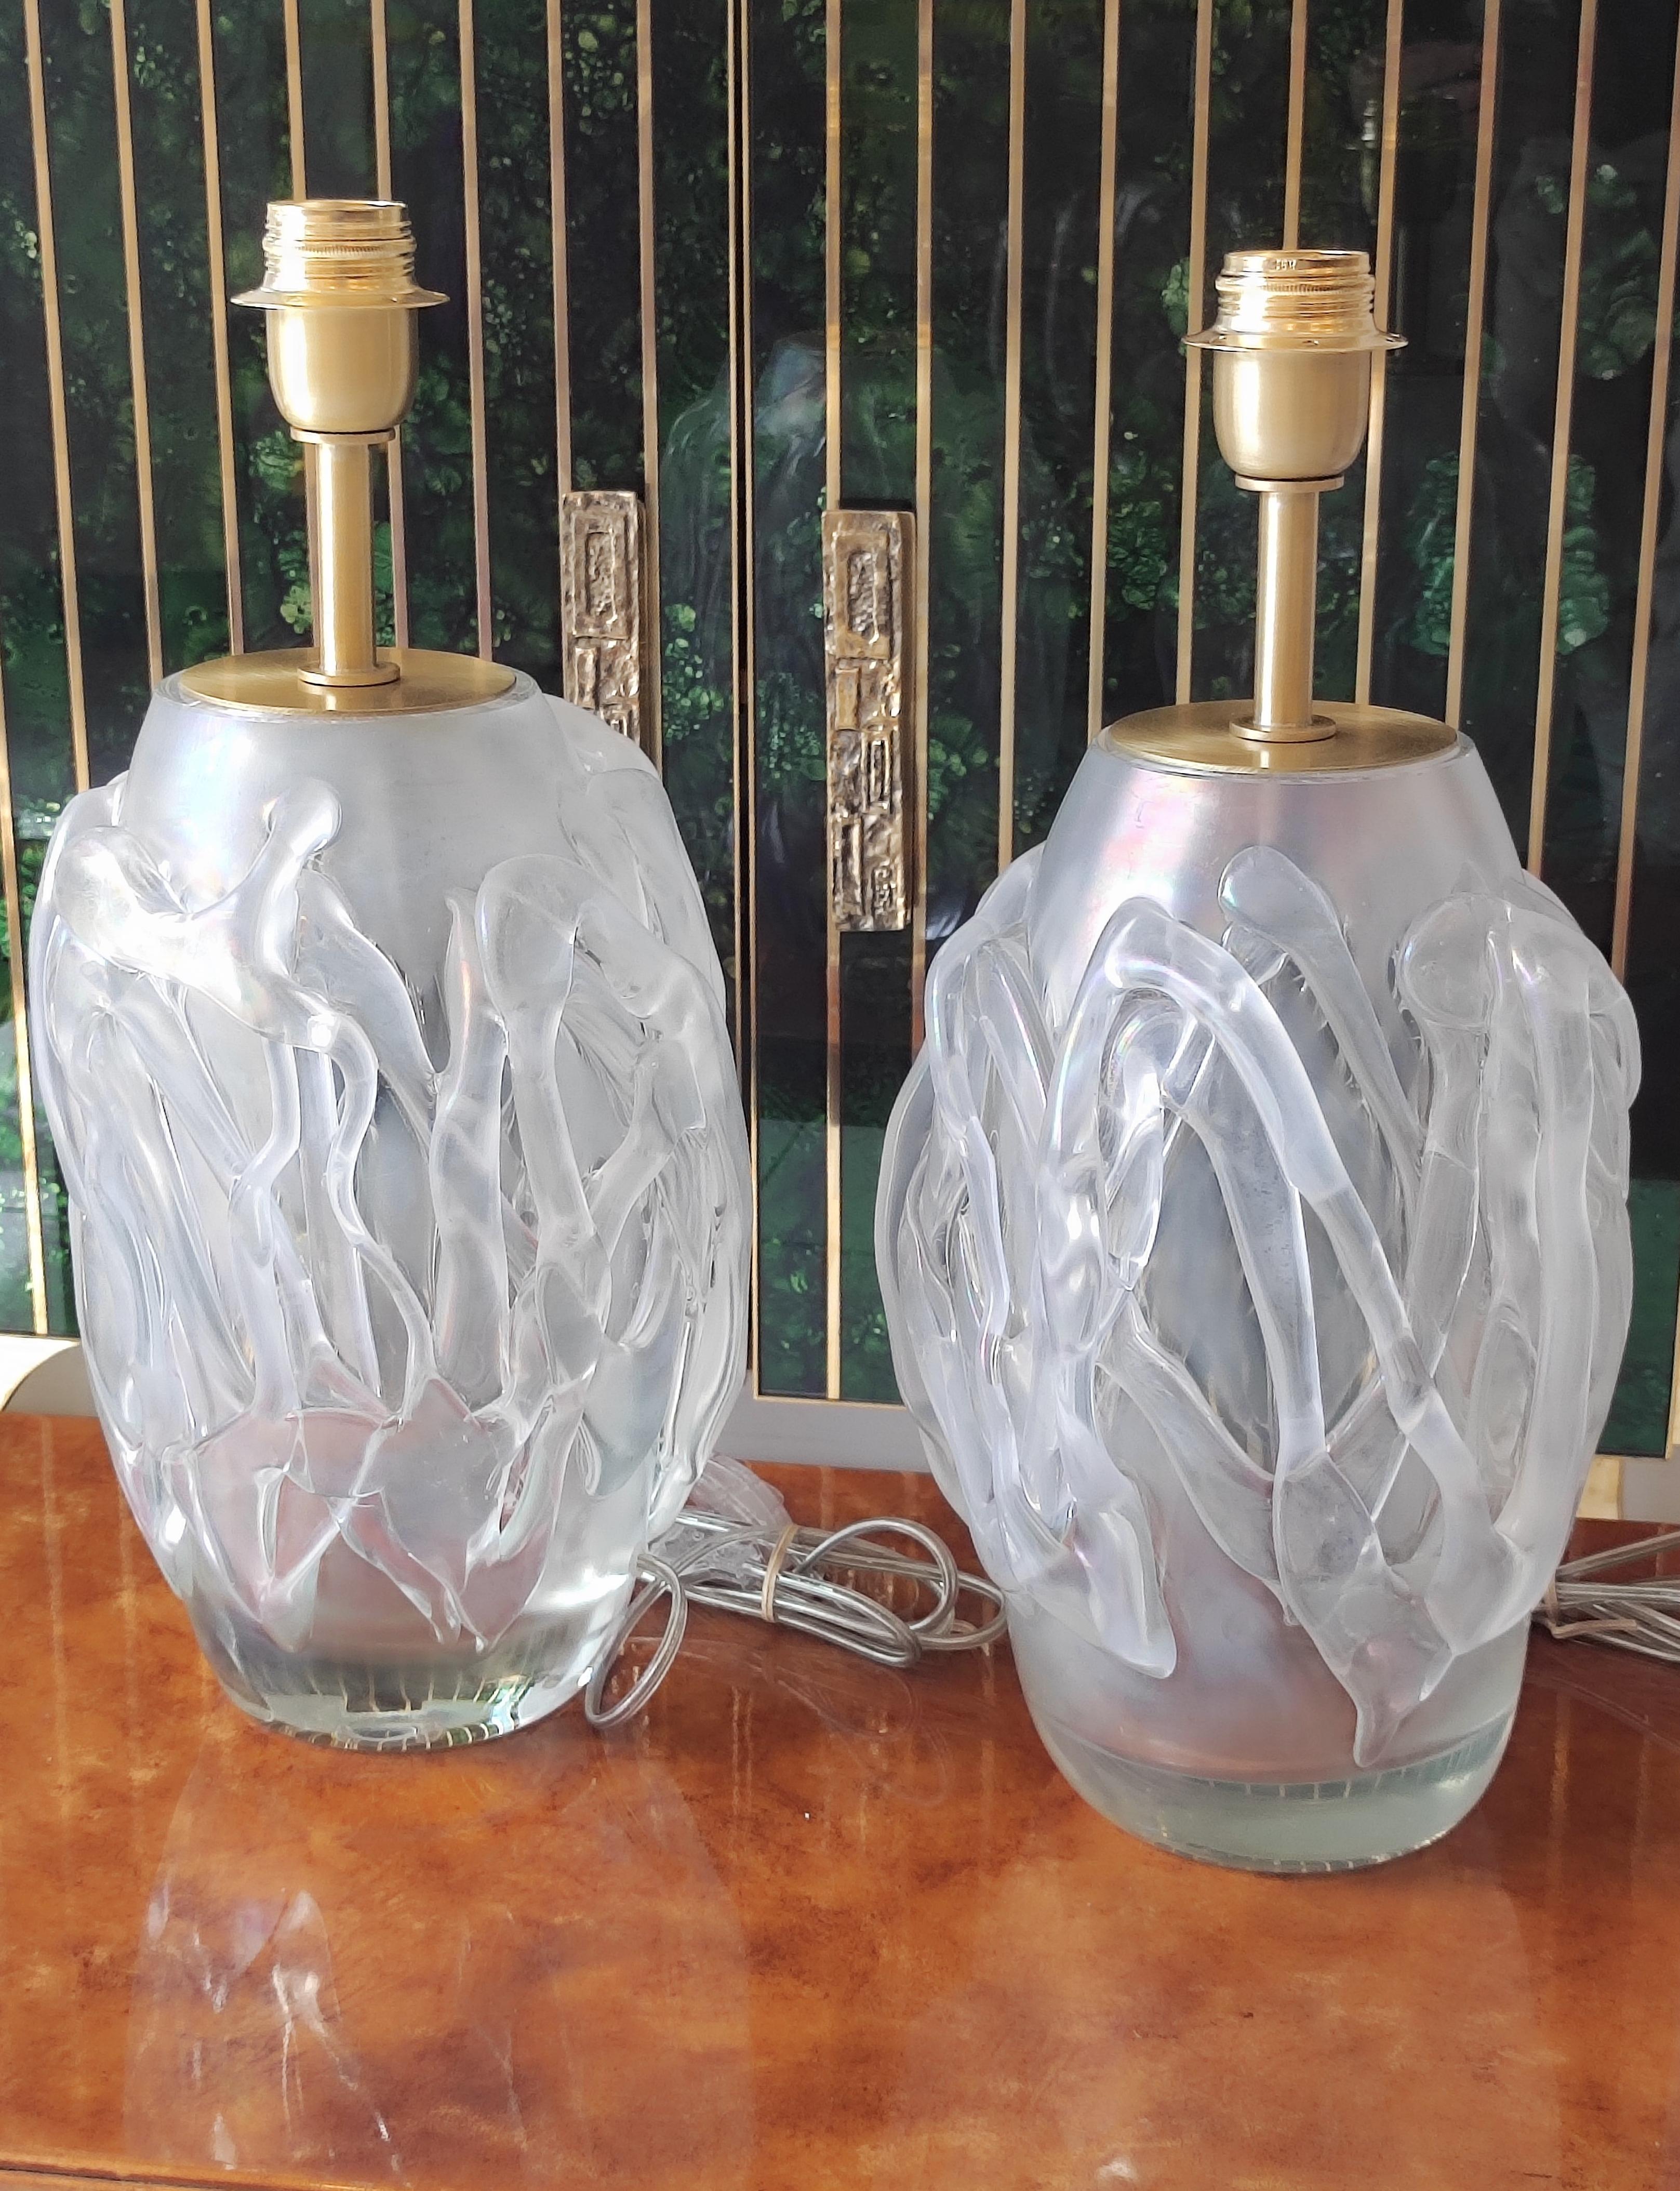 Pair of table lamps, in Murano glass
E26/E27 bulbs, wired for Europe and USA

.